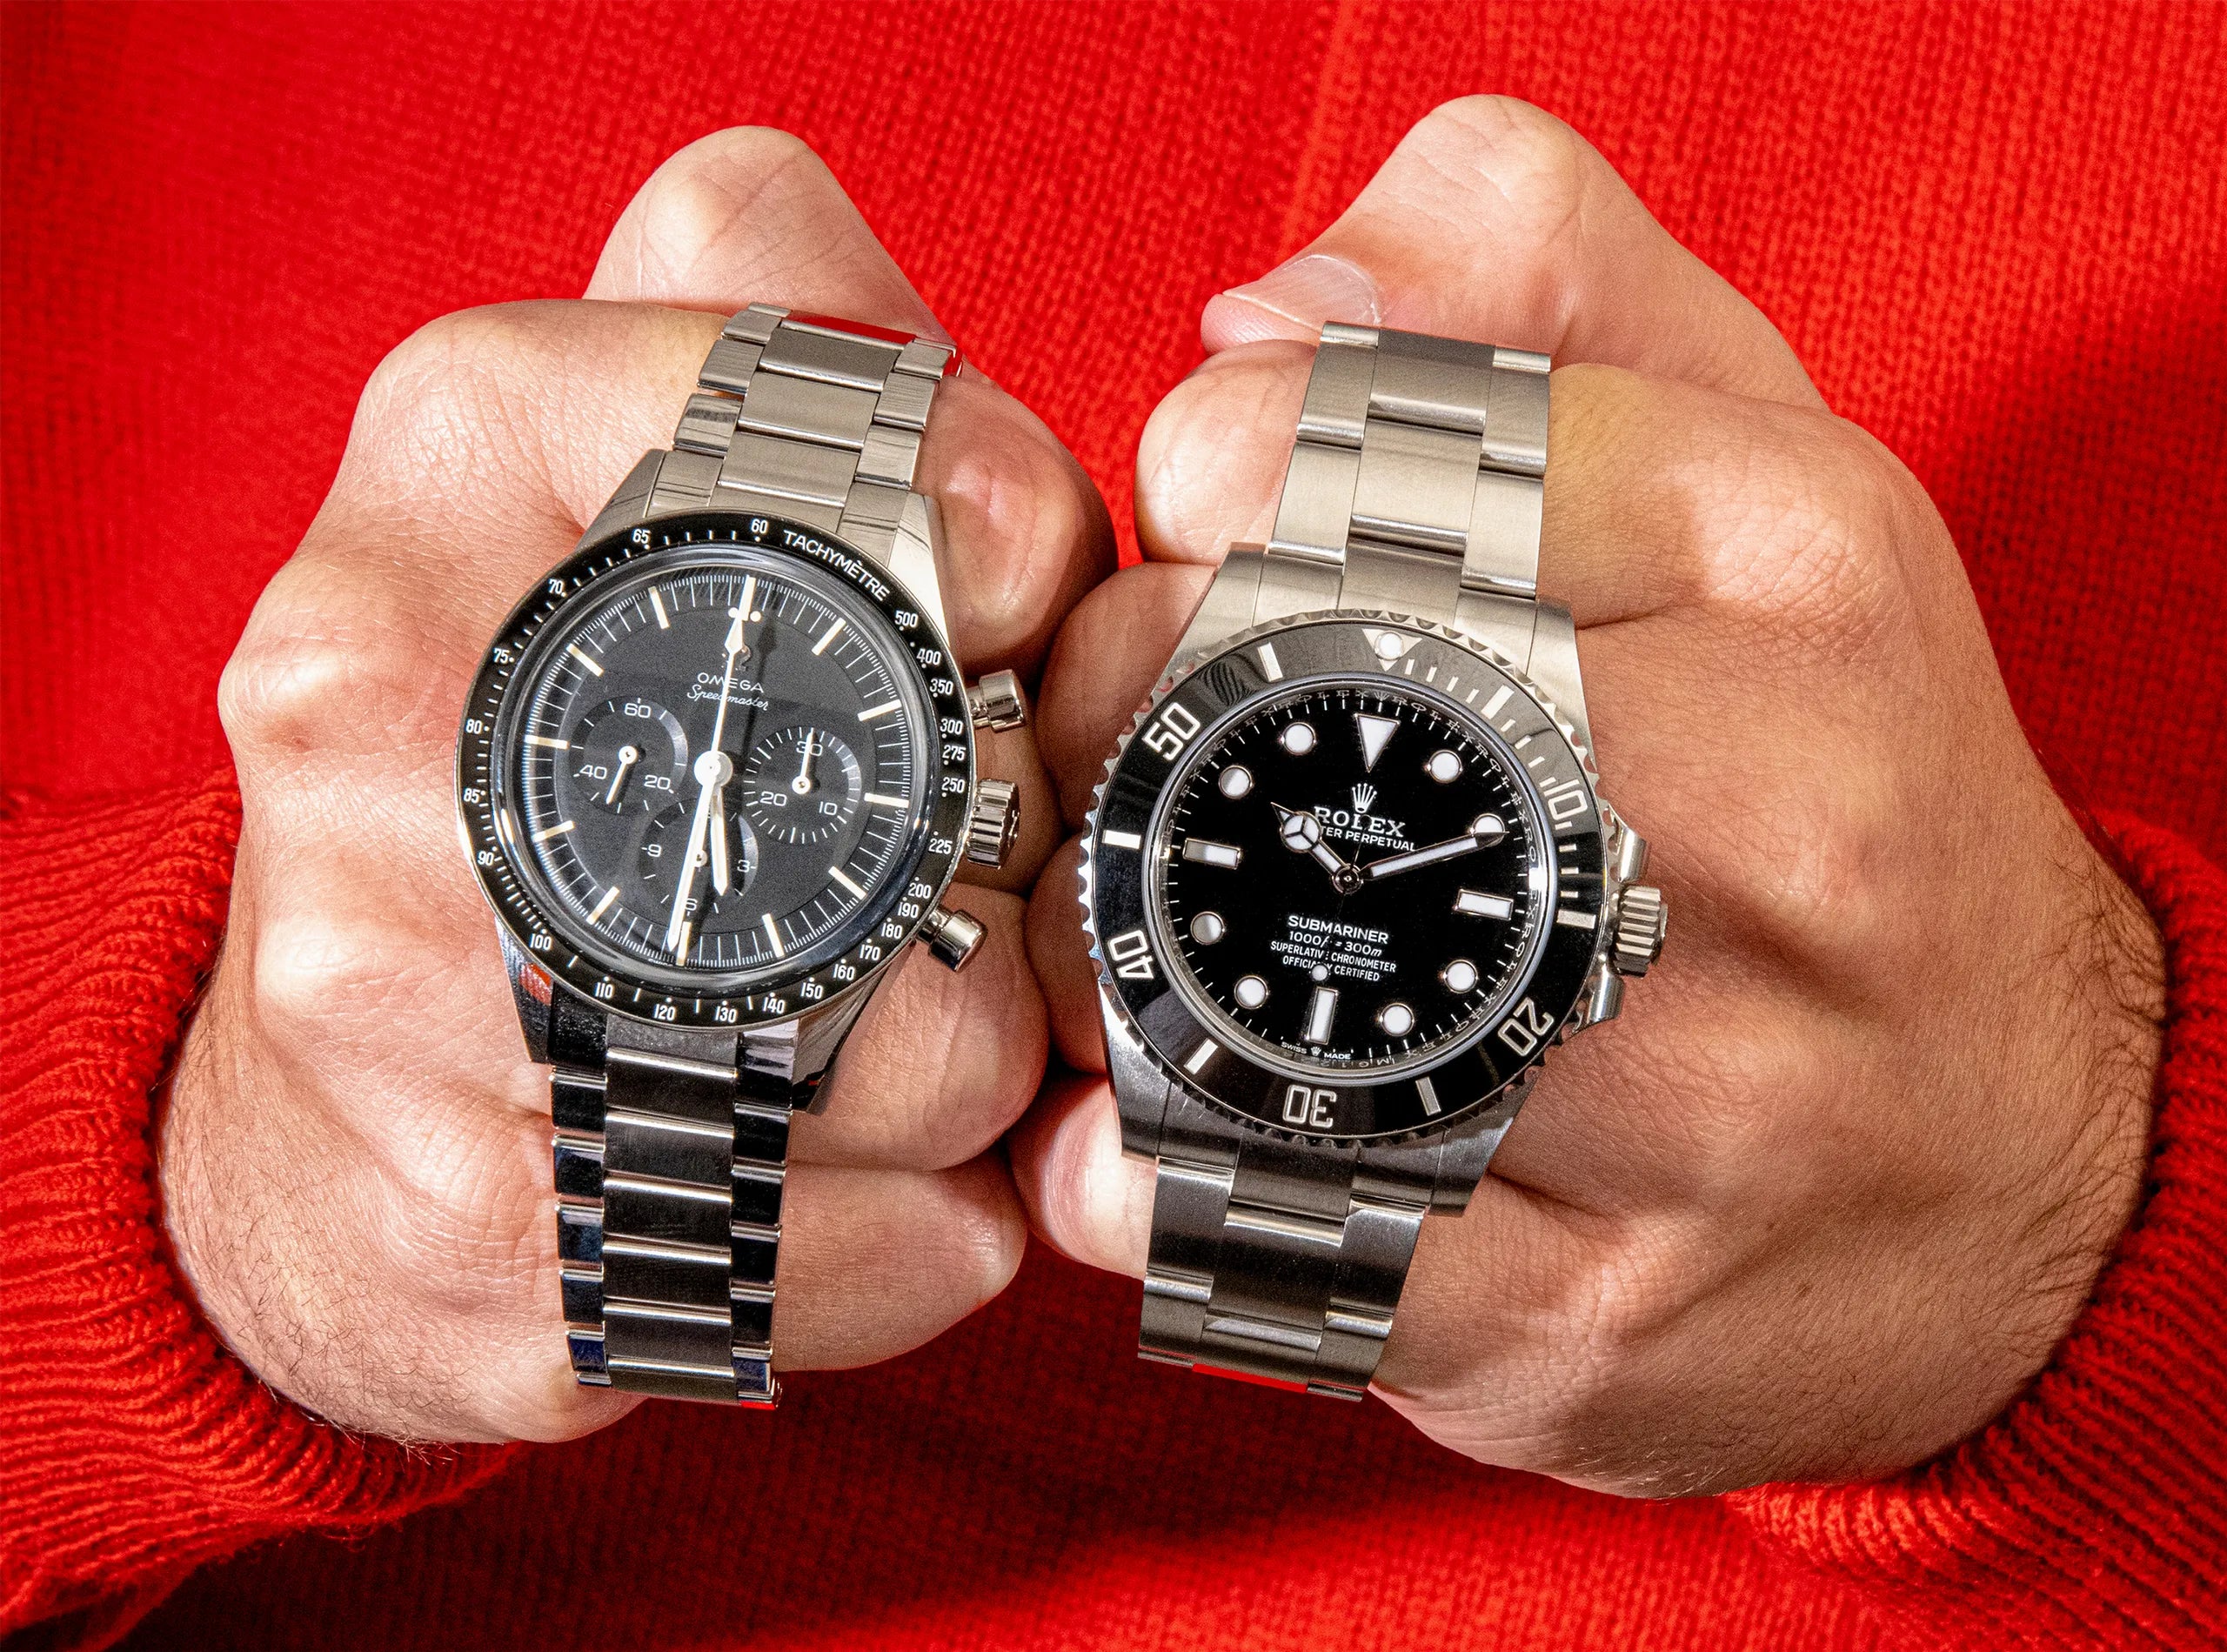 Luxury Watches as a hedge against inflation